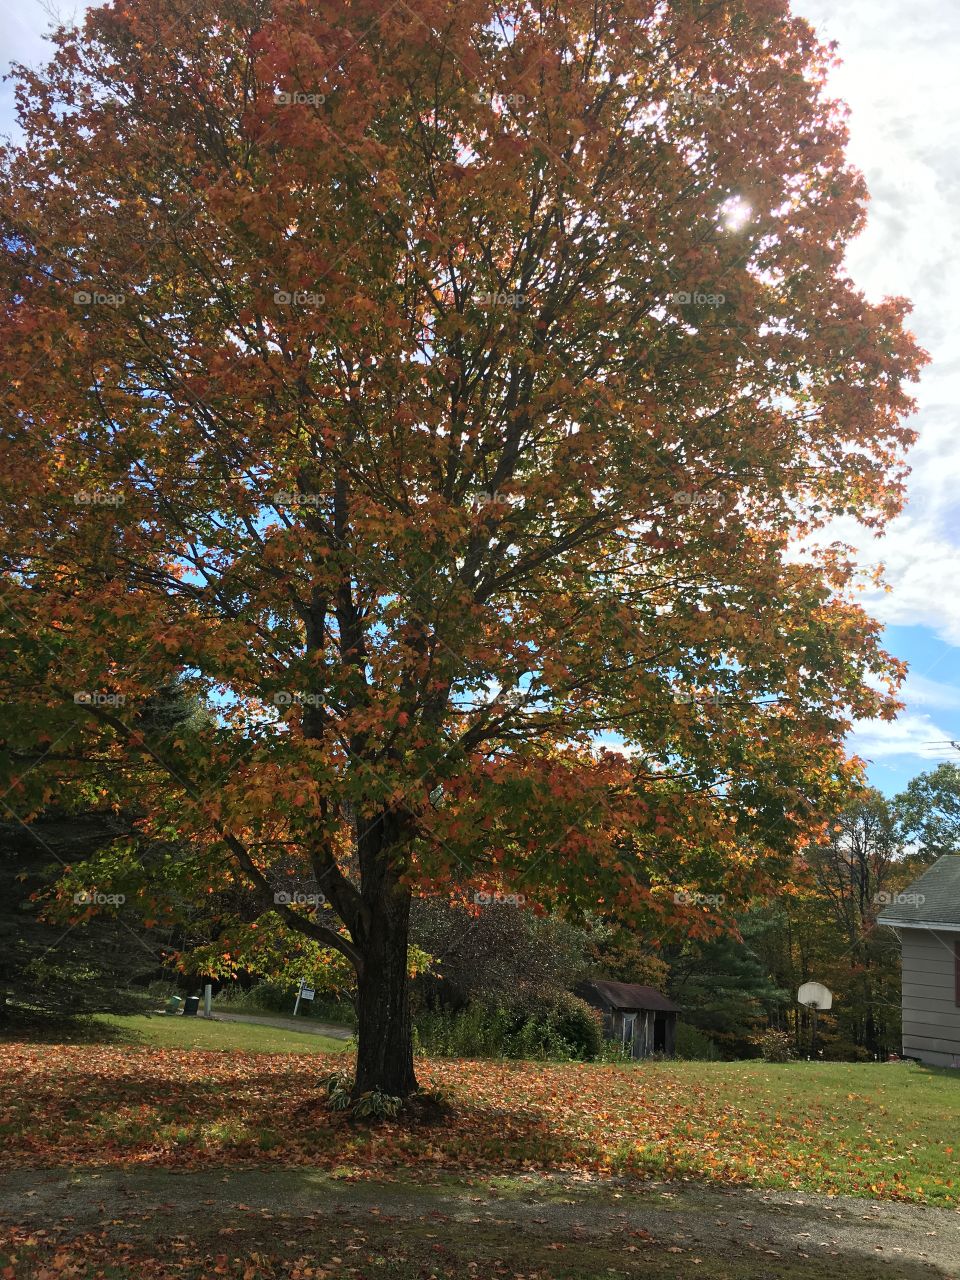 Saw a huge maple tree while walking last fall, sun shining through its falling leaves. 